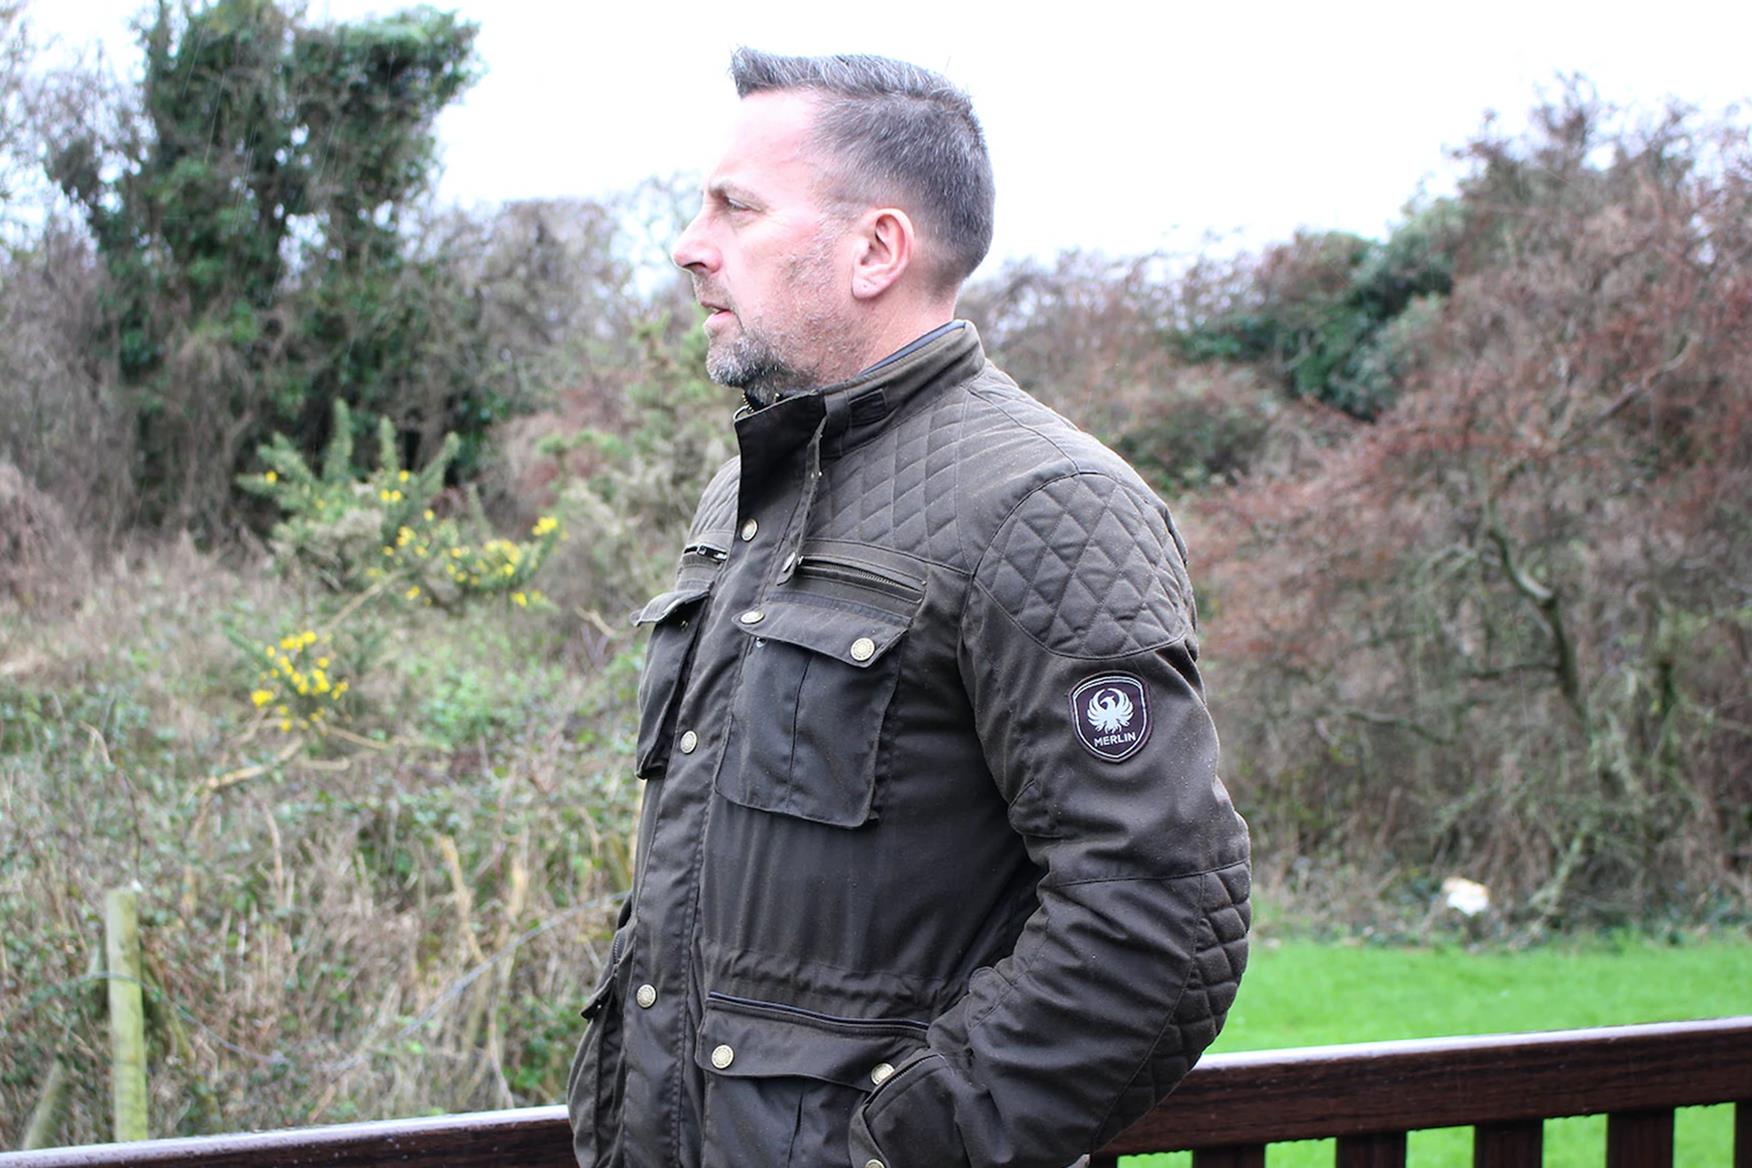 Jacket review: Merlin Edale tried and tested